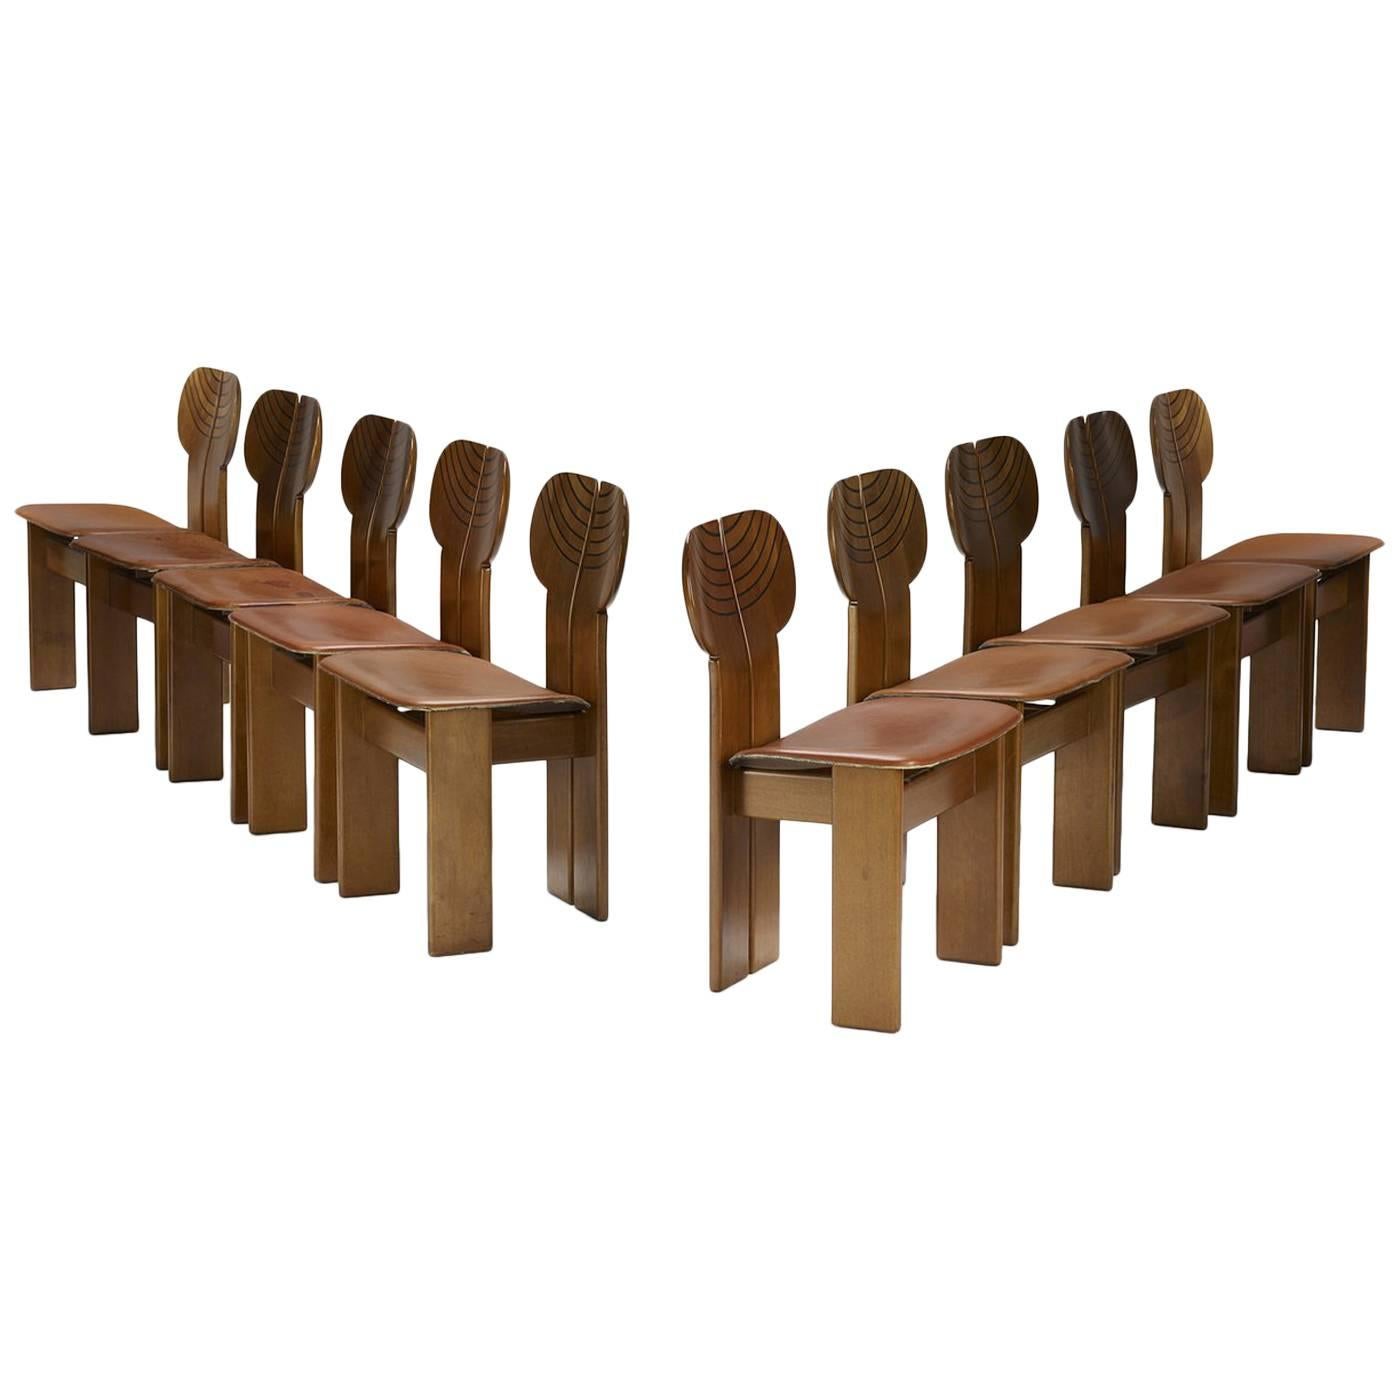 Set of Ten Africa Chairs from the Artona Series by Afra & Tobia Scarpa